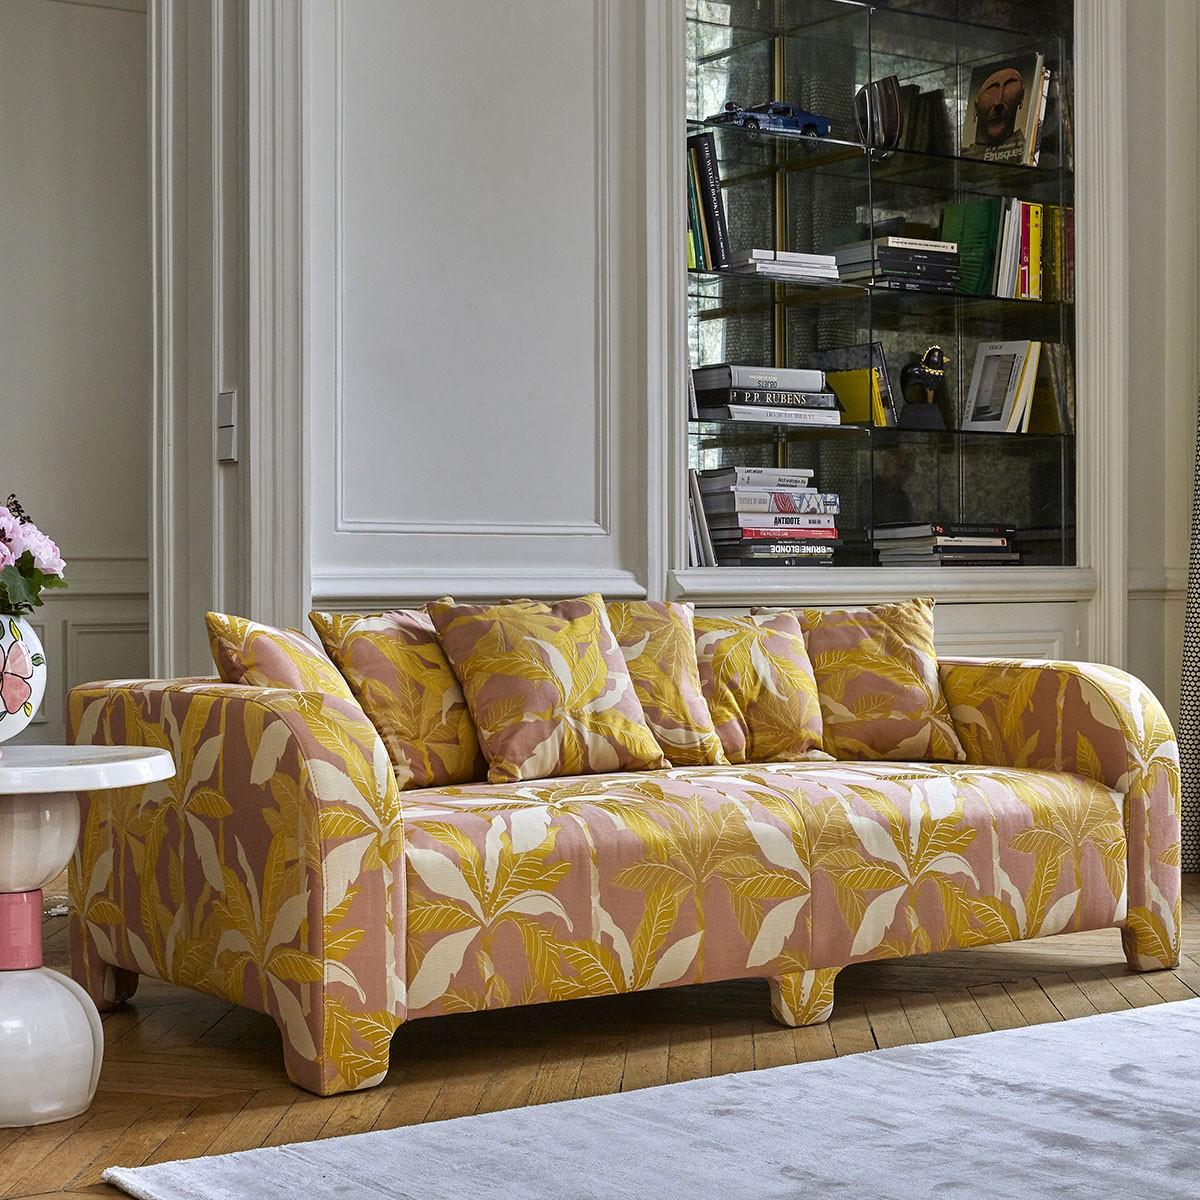 Popus Editions Graziella 2 seater sofa in Ocher London linen fabric

A foot that hides another. A cushion that hides another. A curve that hides another with contemporary lines and a base like a punctuation mark, this sofa gives pride of place to